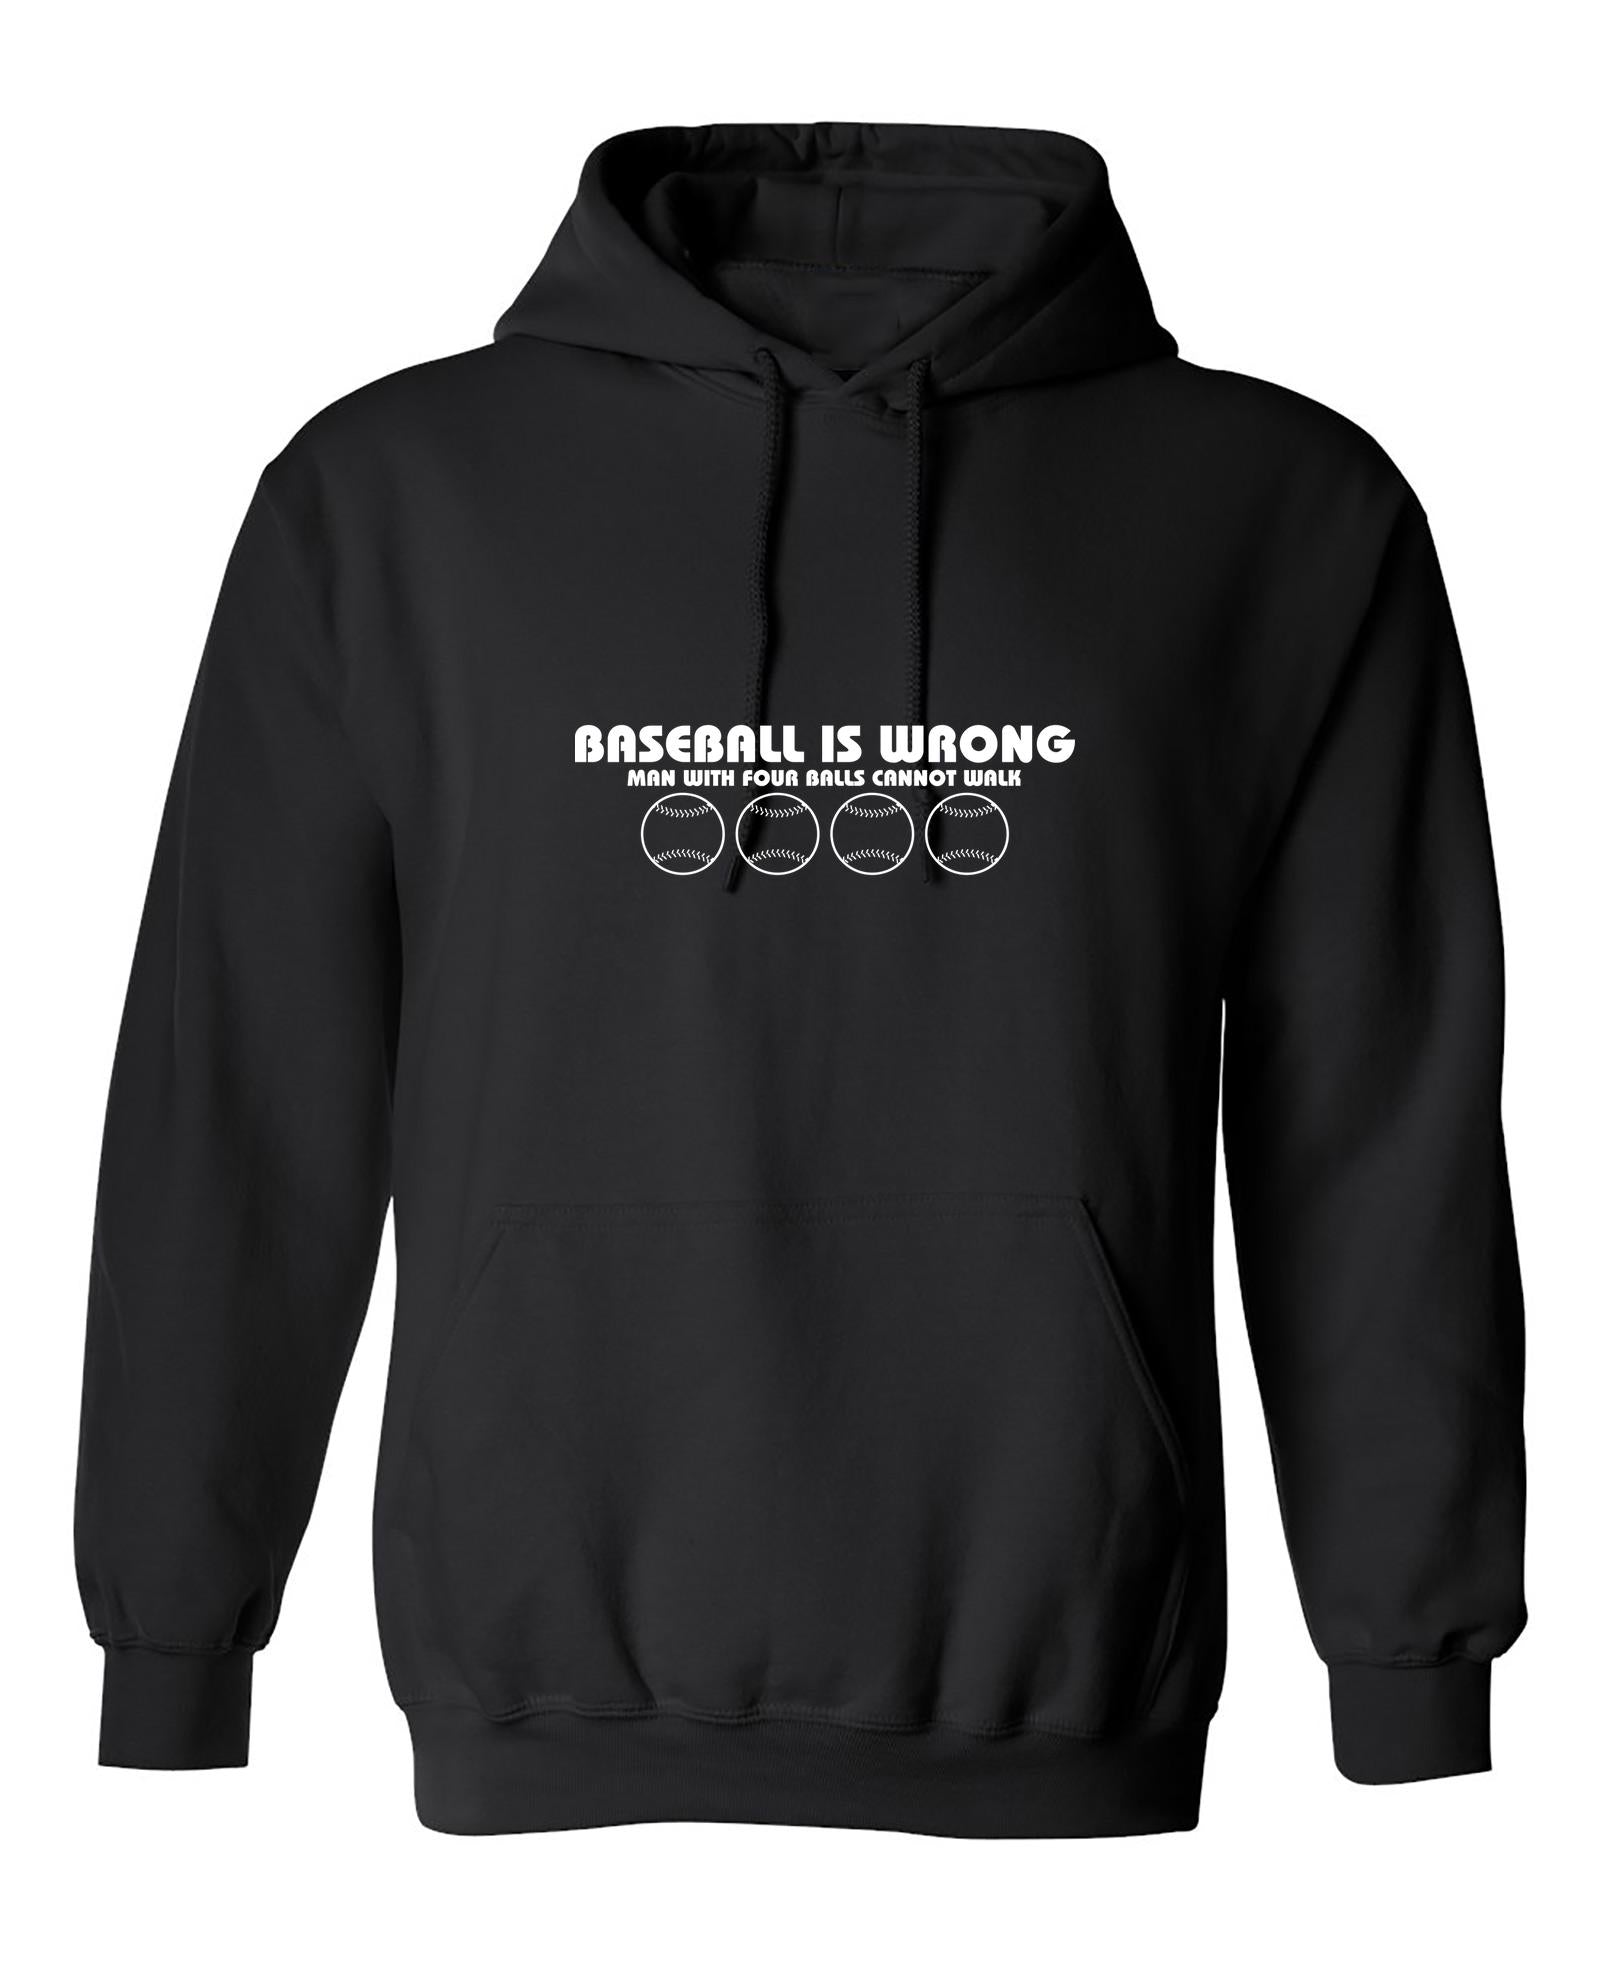 Funny T-Shirts design "Baseball Is Wrong, Man With Four Balls Cannot Walk"